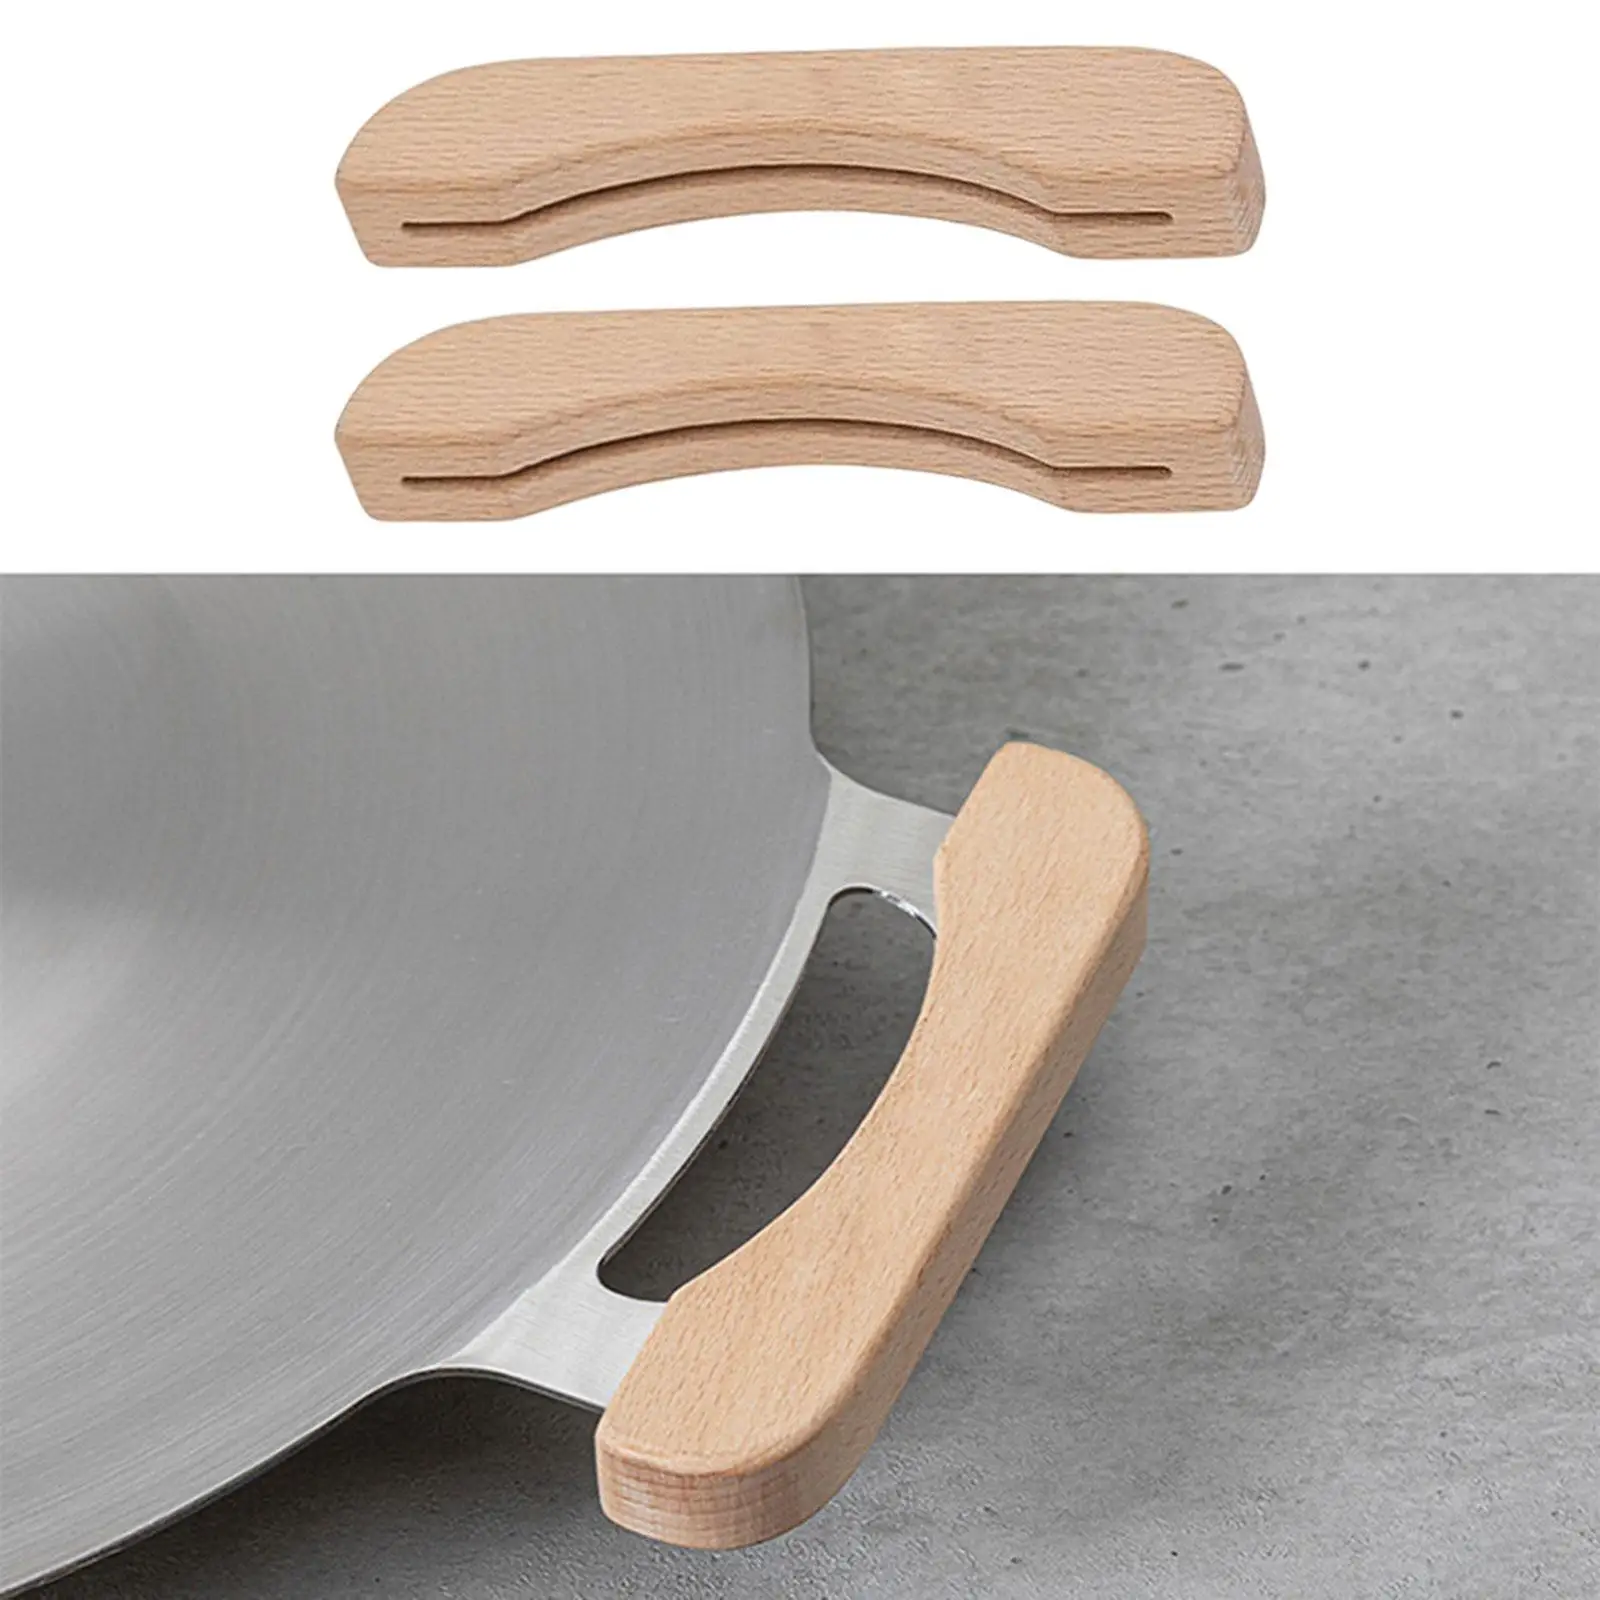 2Pcs Solid Wood BBQ Pan Handle Anti Scald Insulated for Grill Pan Outdoor